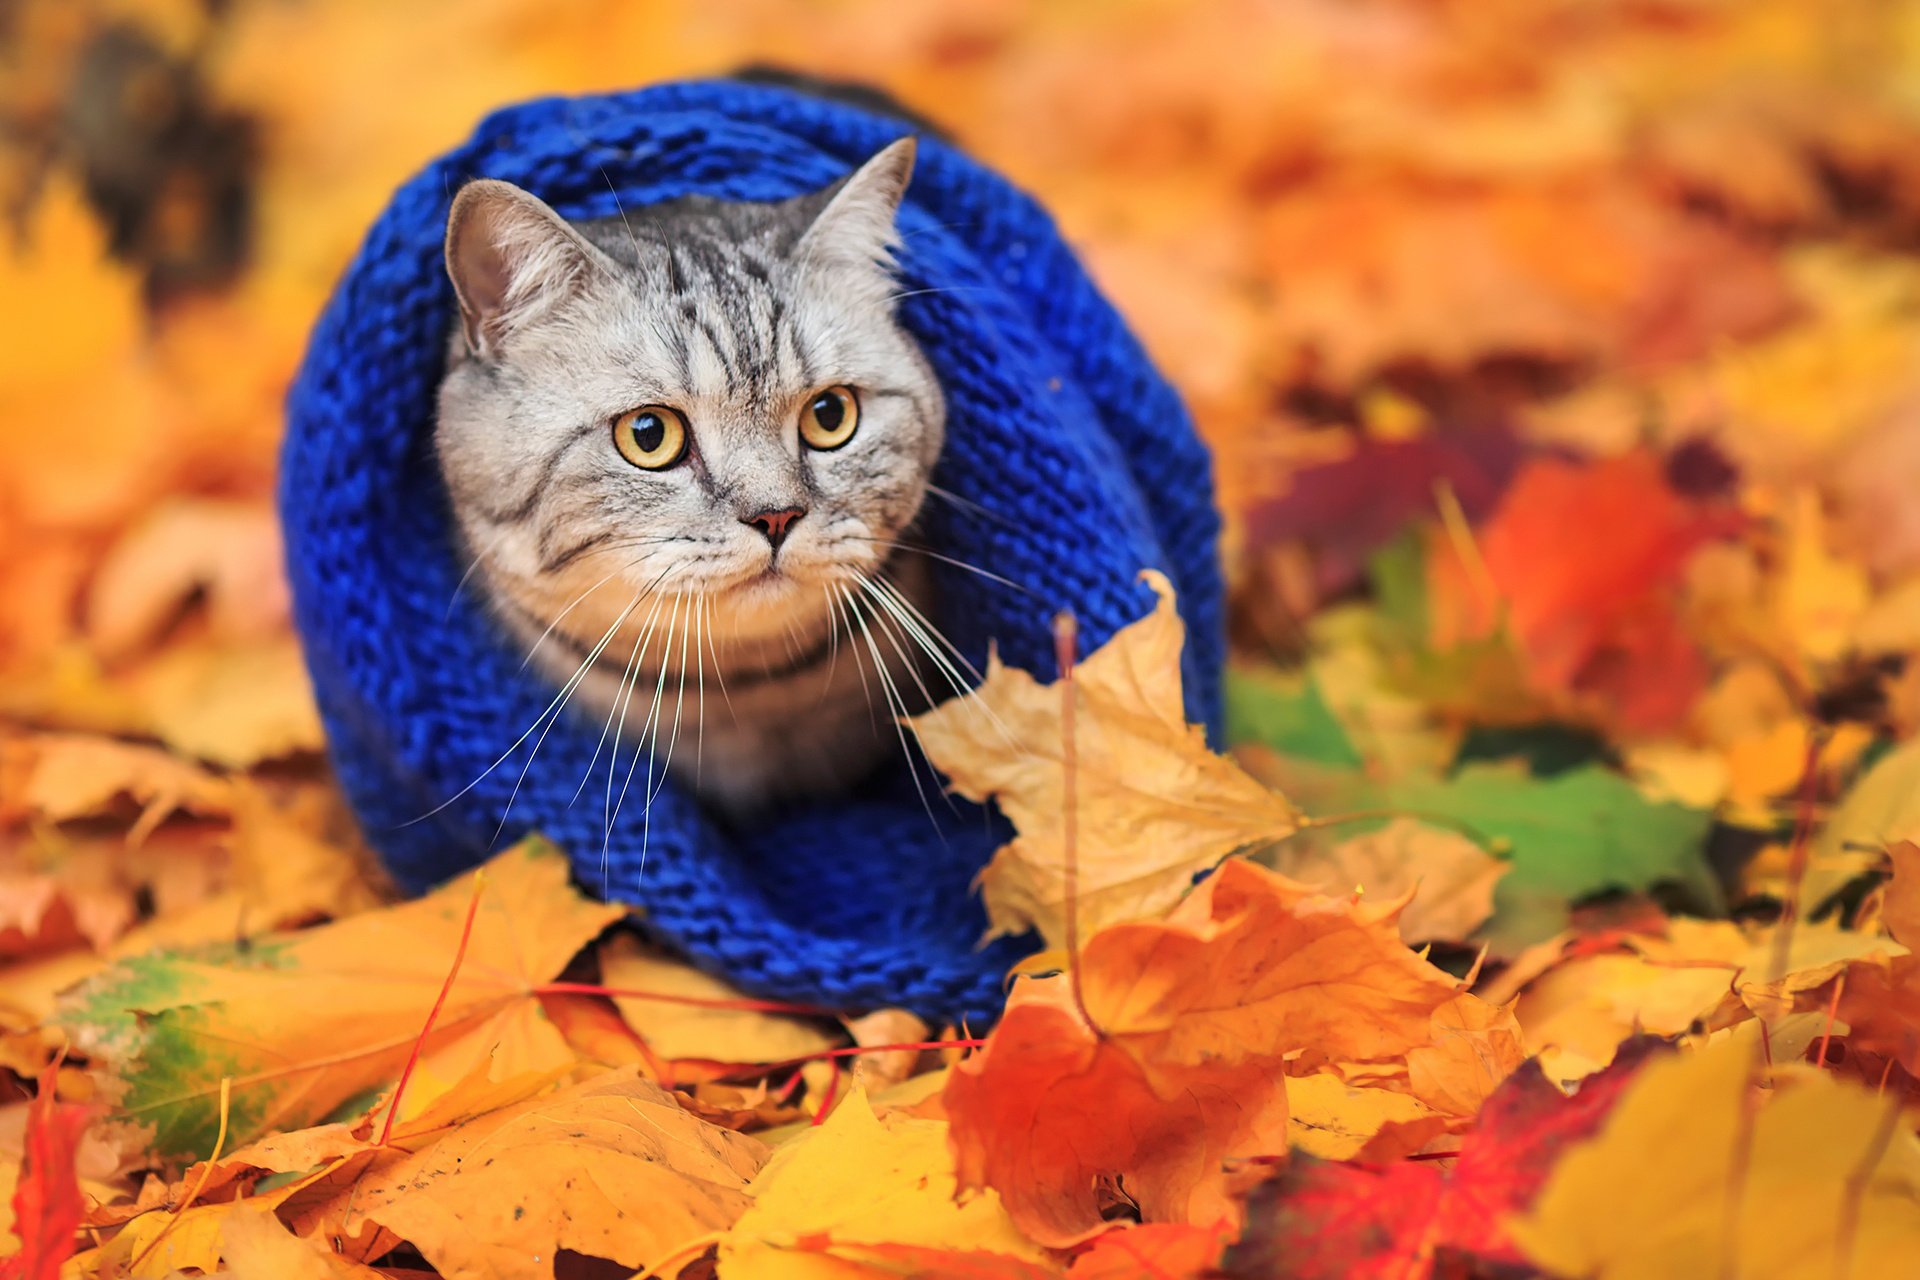 Cat scarf autumn leaves wallpaper | 1920x1280 | 485753 | WallpaperUP